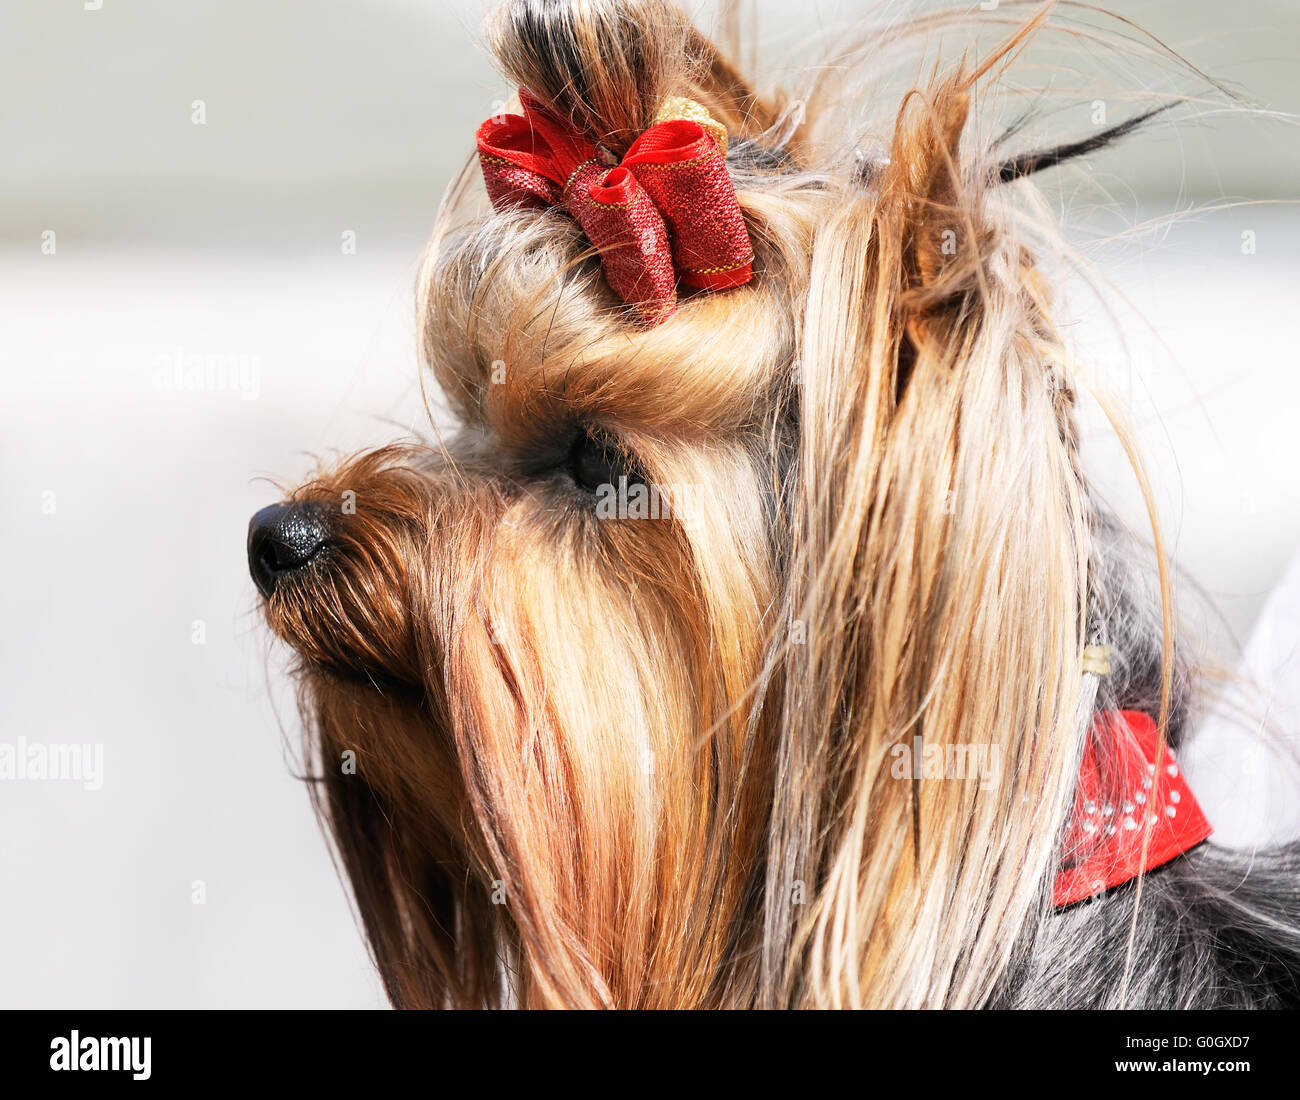 Yorkshire terrier outdoor portrait over blurry background Stock Photo